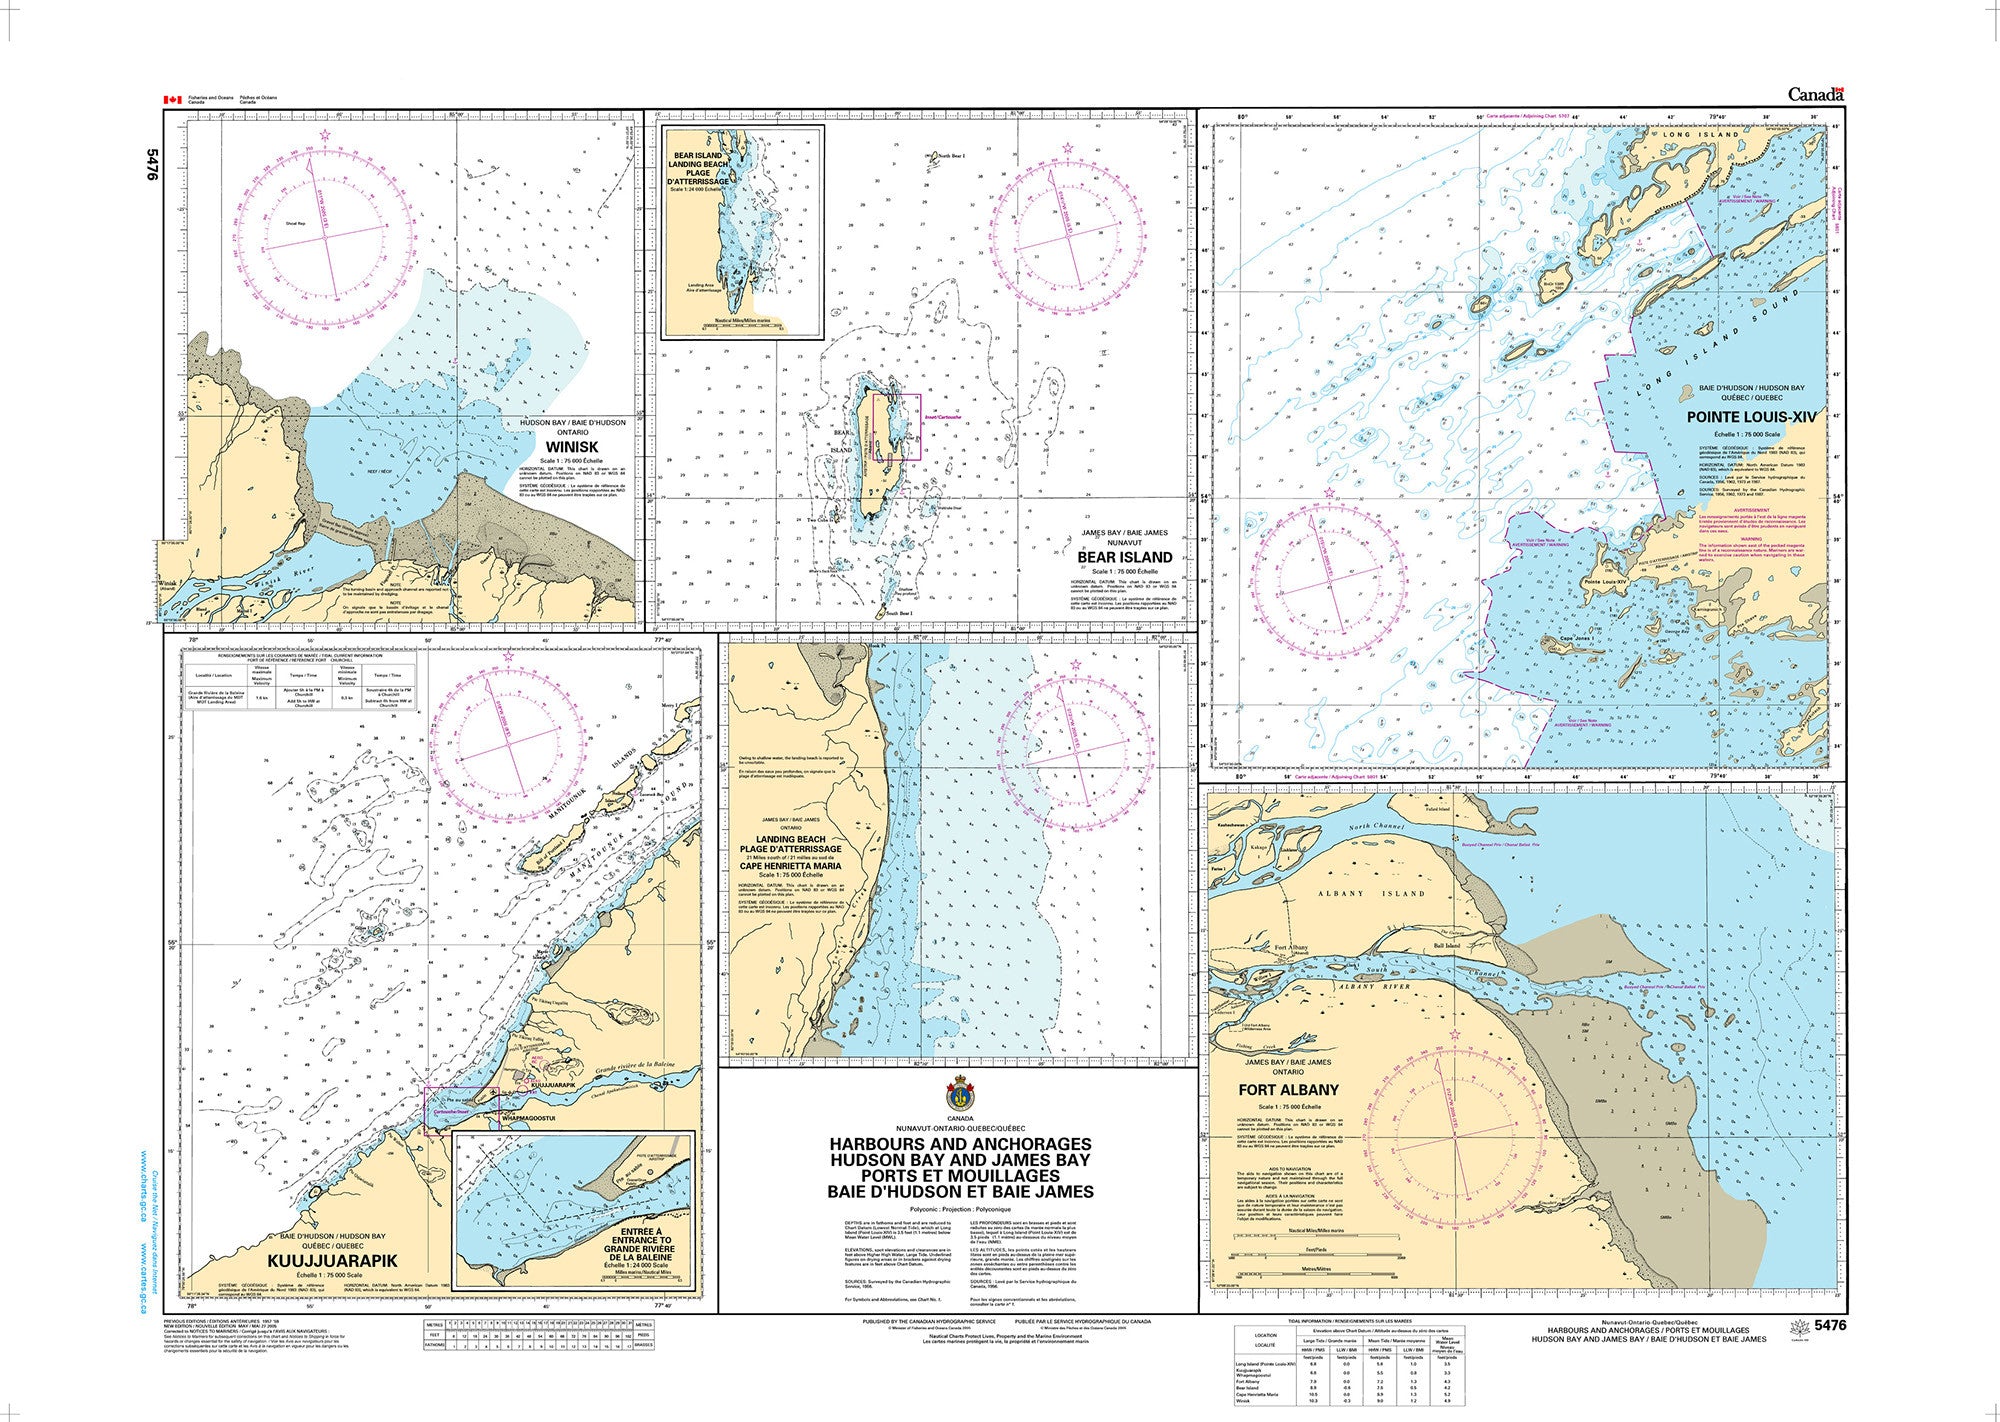 Canadian Hydrographic Service Nautical Chart CHS5476: Harbours and Anchorages Hudson Bay and James Bay/Ports et Mouillages Baie d'Hudson et Baie James...